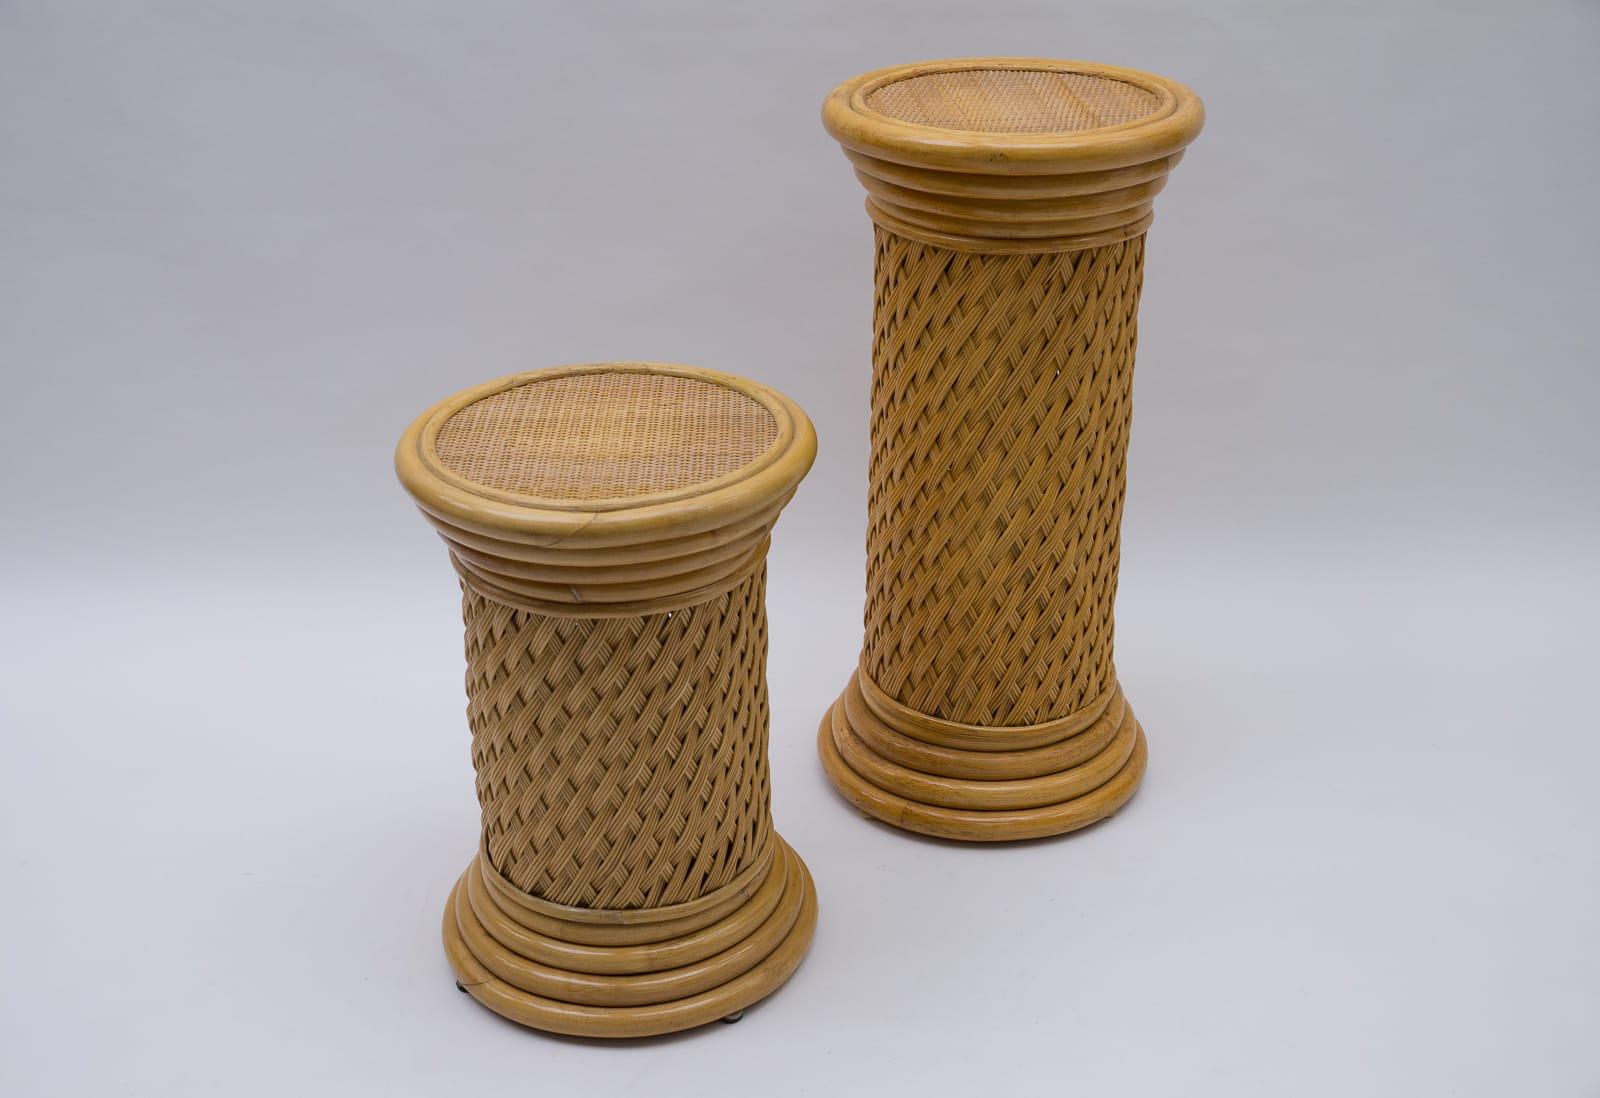 2 Elegant Hollywood Regency Rattan Wicker and Bamboo Columns, 1960s, Italy For Sale 1